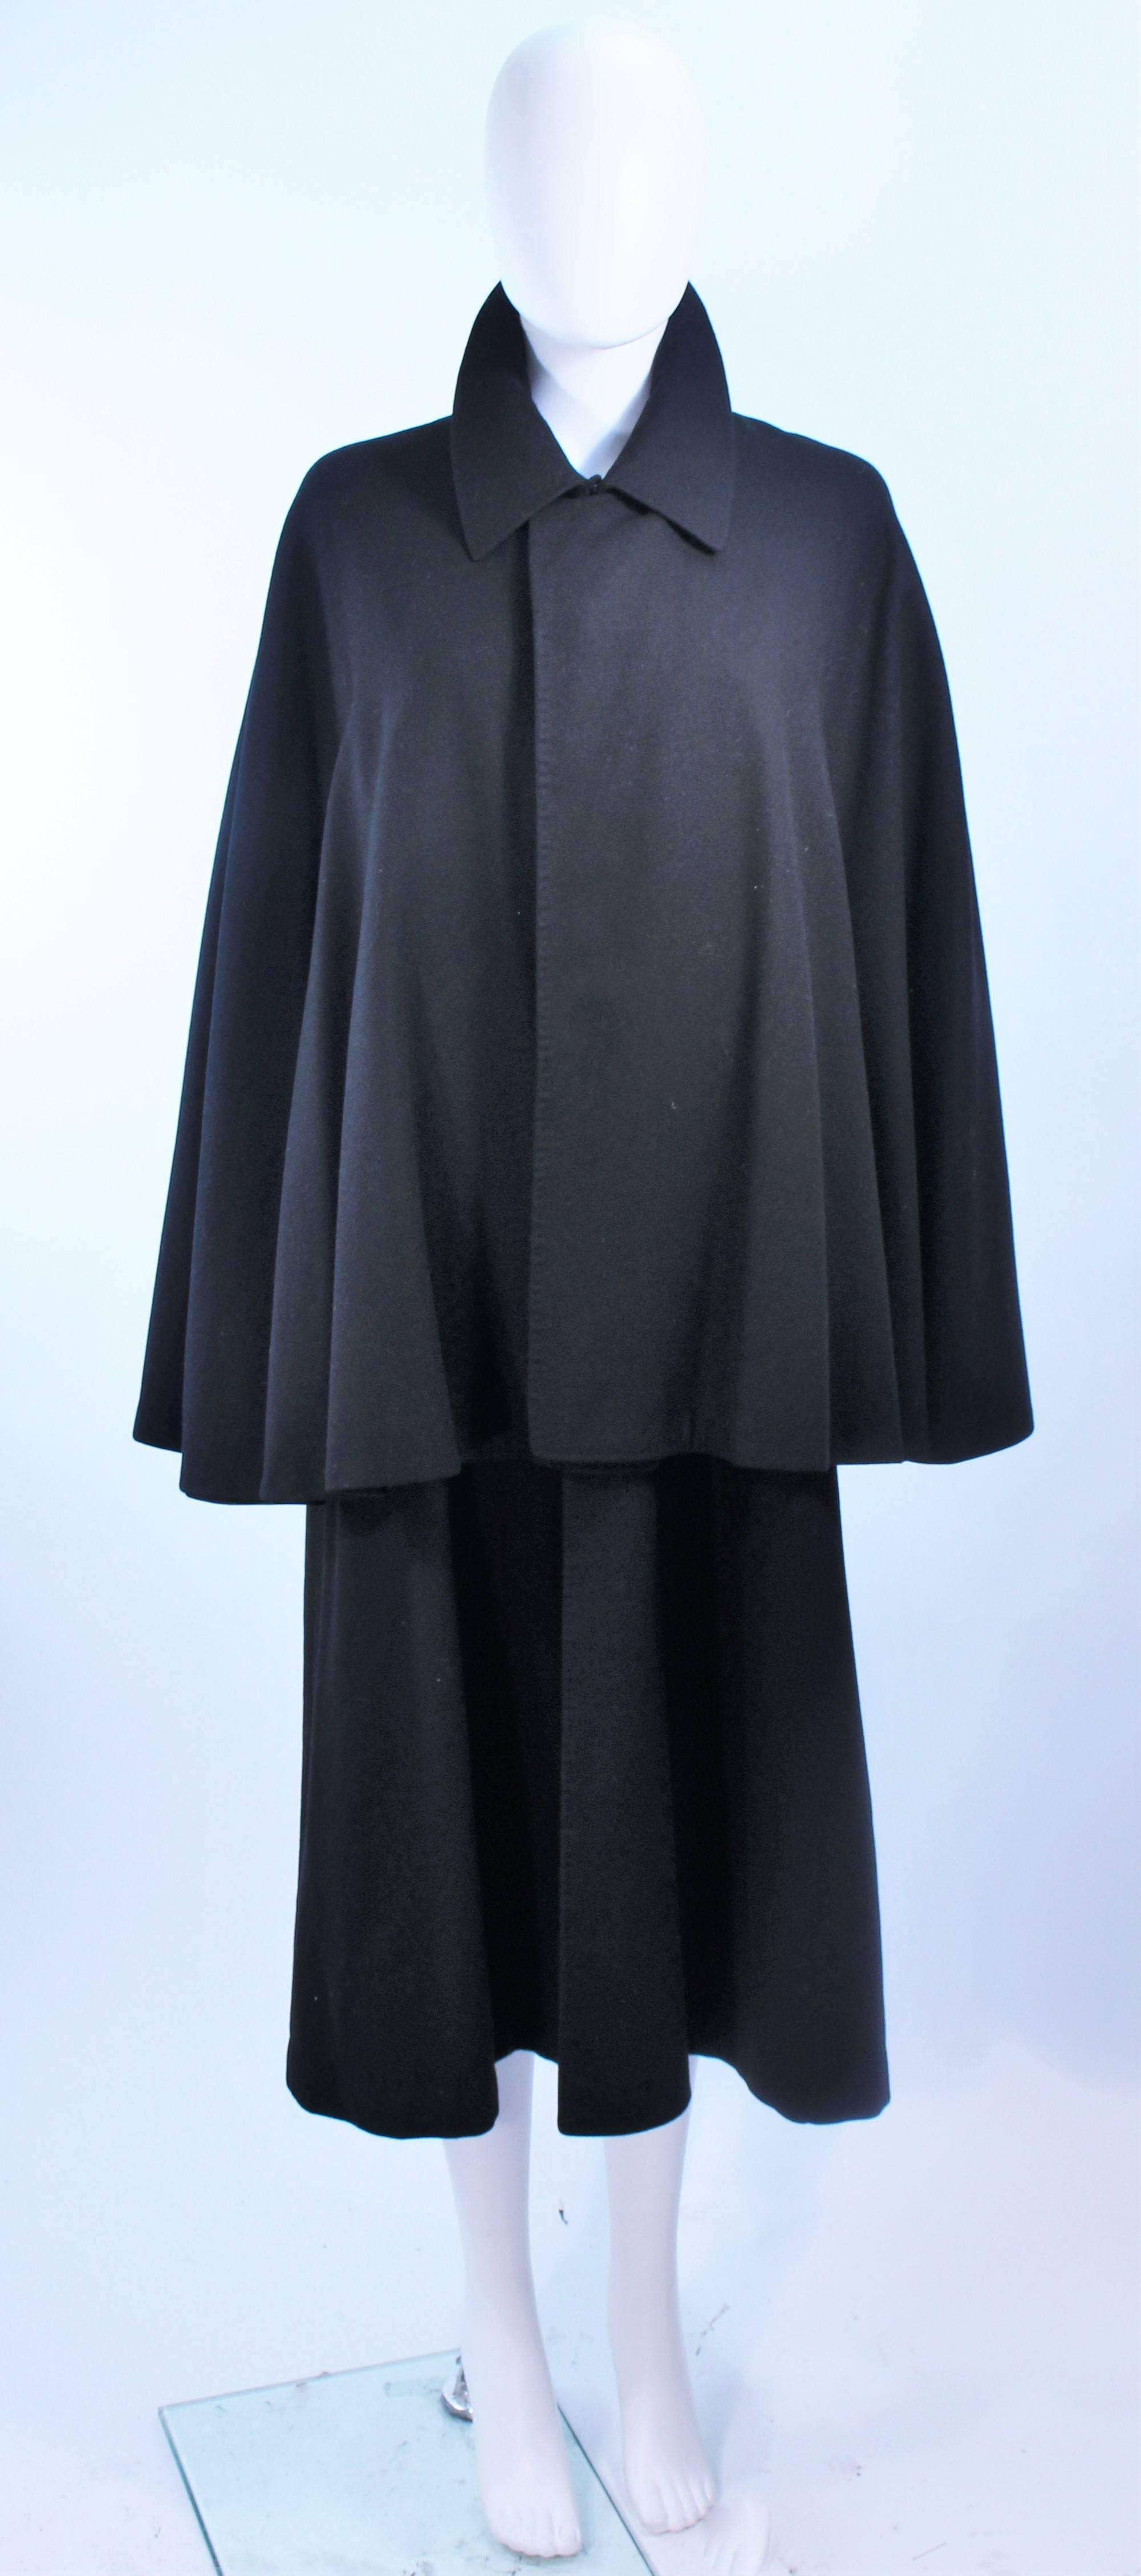 This vintage coat is composed of a black wool and features center front buttons. In excellent vintage condition.

**Please cross-reference measurements for personal accuracy. Size in description box is an estimation.

Measures